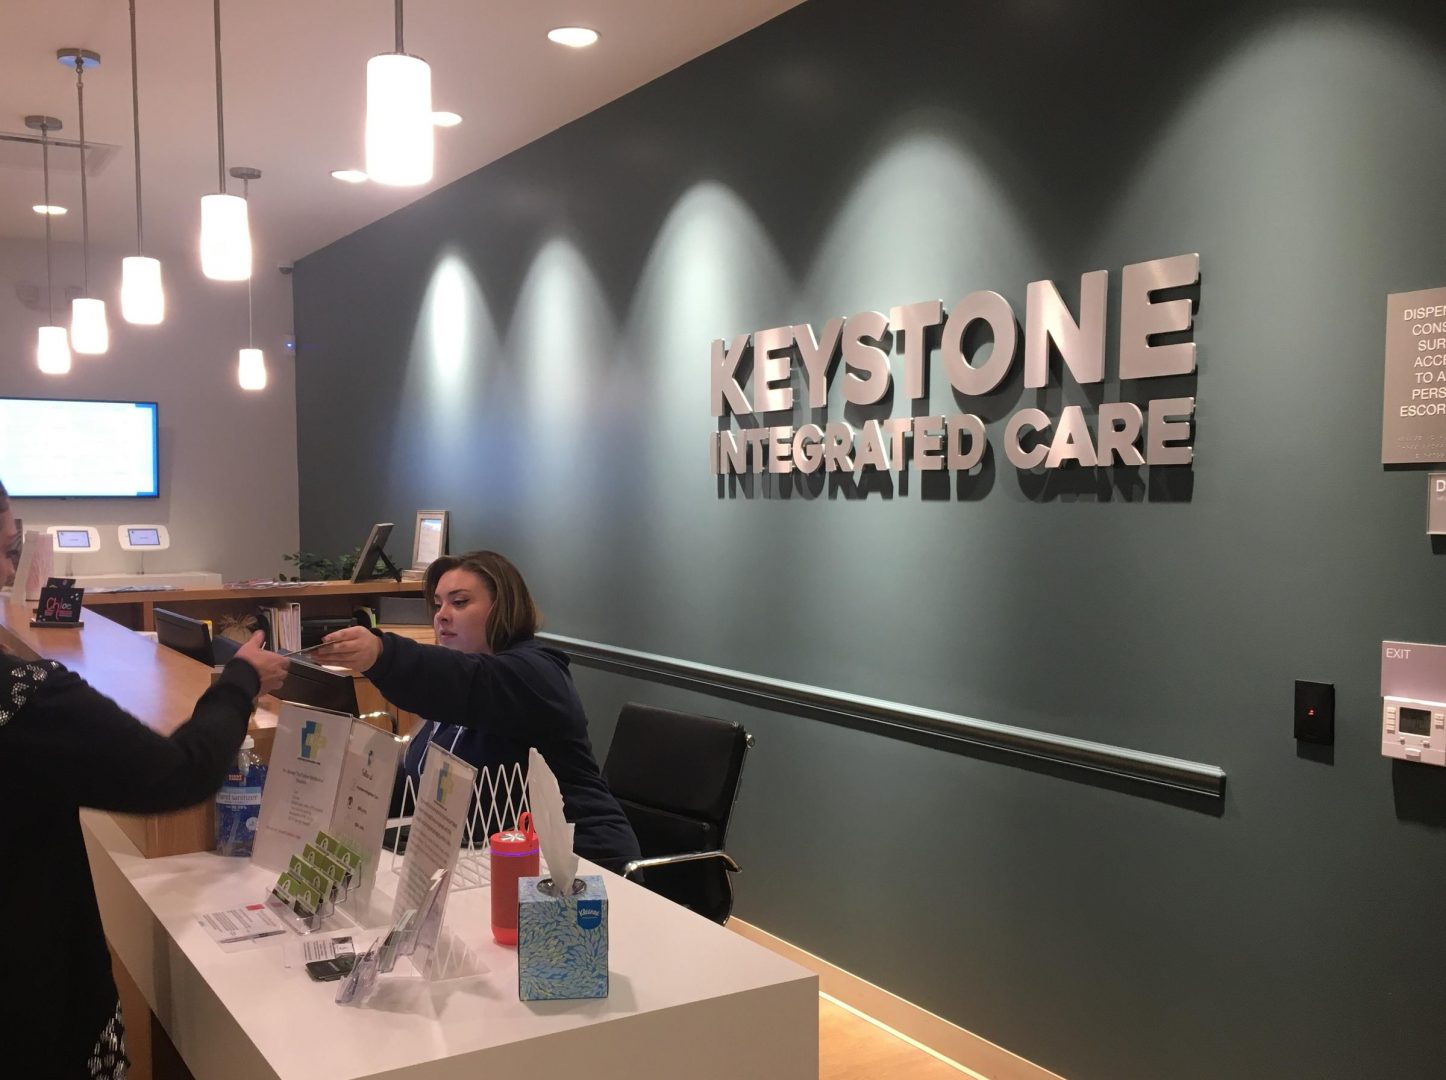 The dispensary Keystone Integrated Care opened a location in Pittsburgh's Lawrenceville neighborhood in October, and banks with McCandless-based SSB Bank.